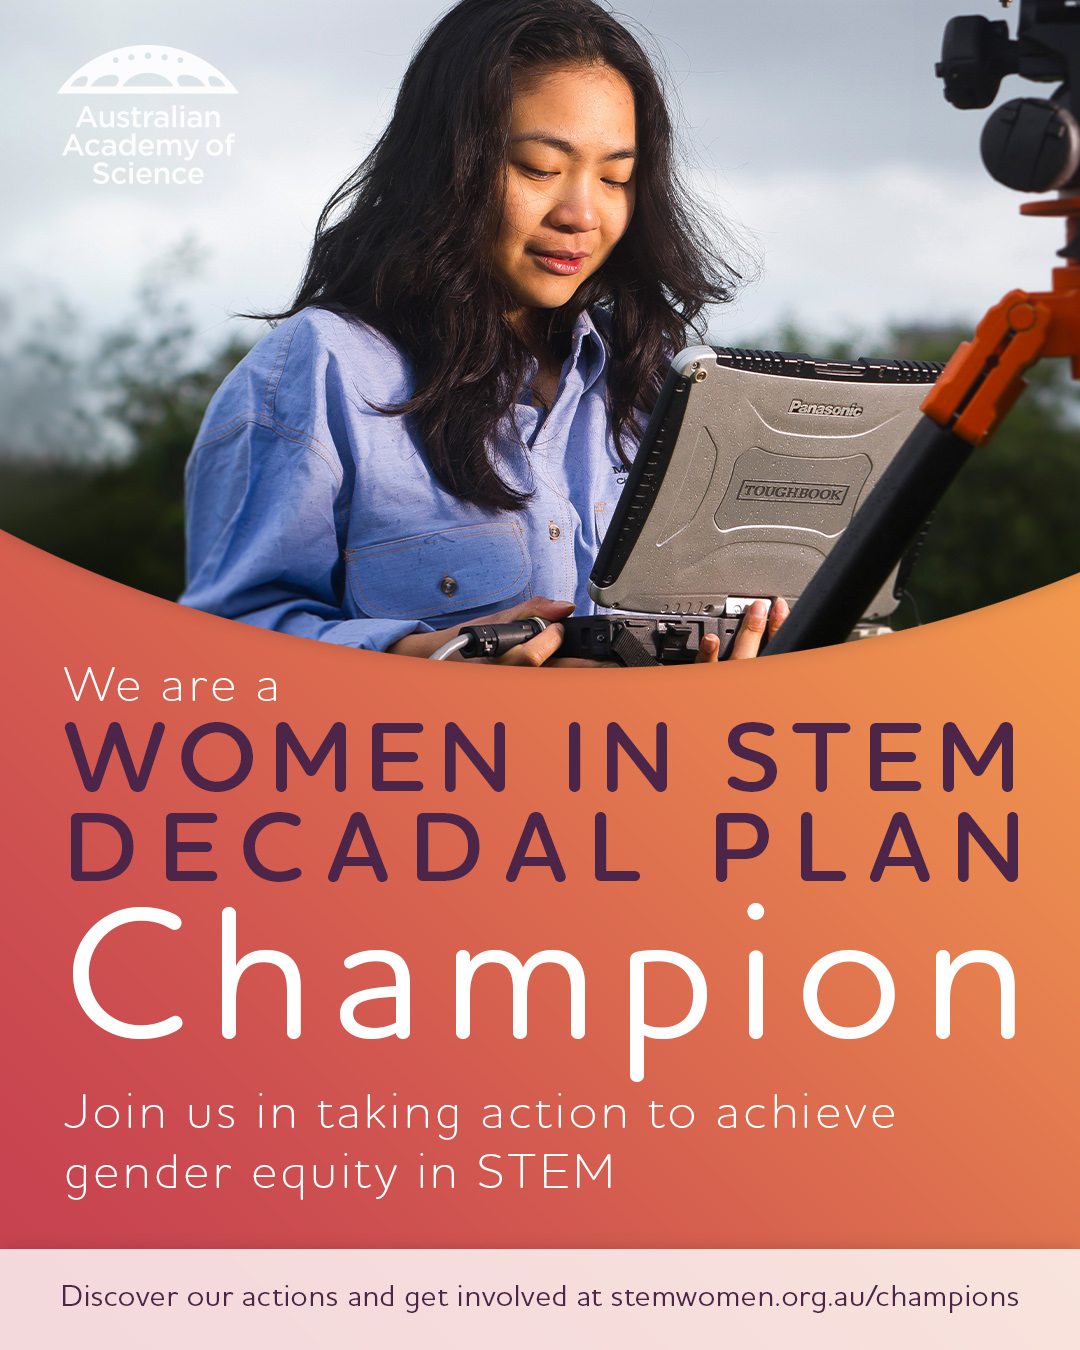 Proud to be a Women in STEM Decadal Plan Champion